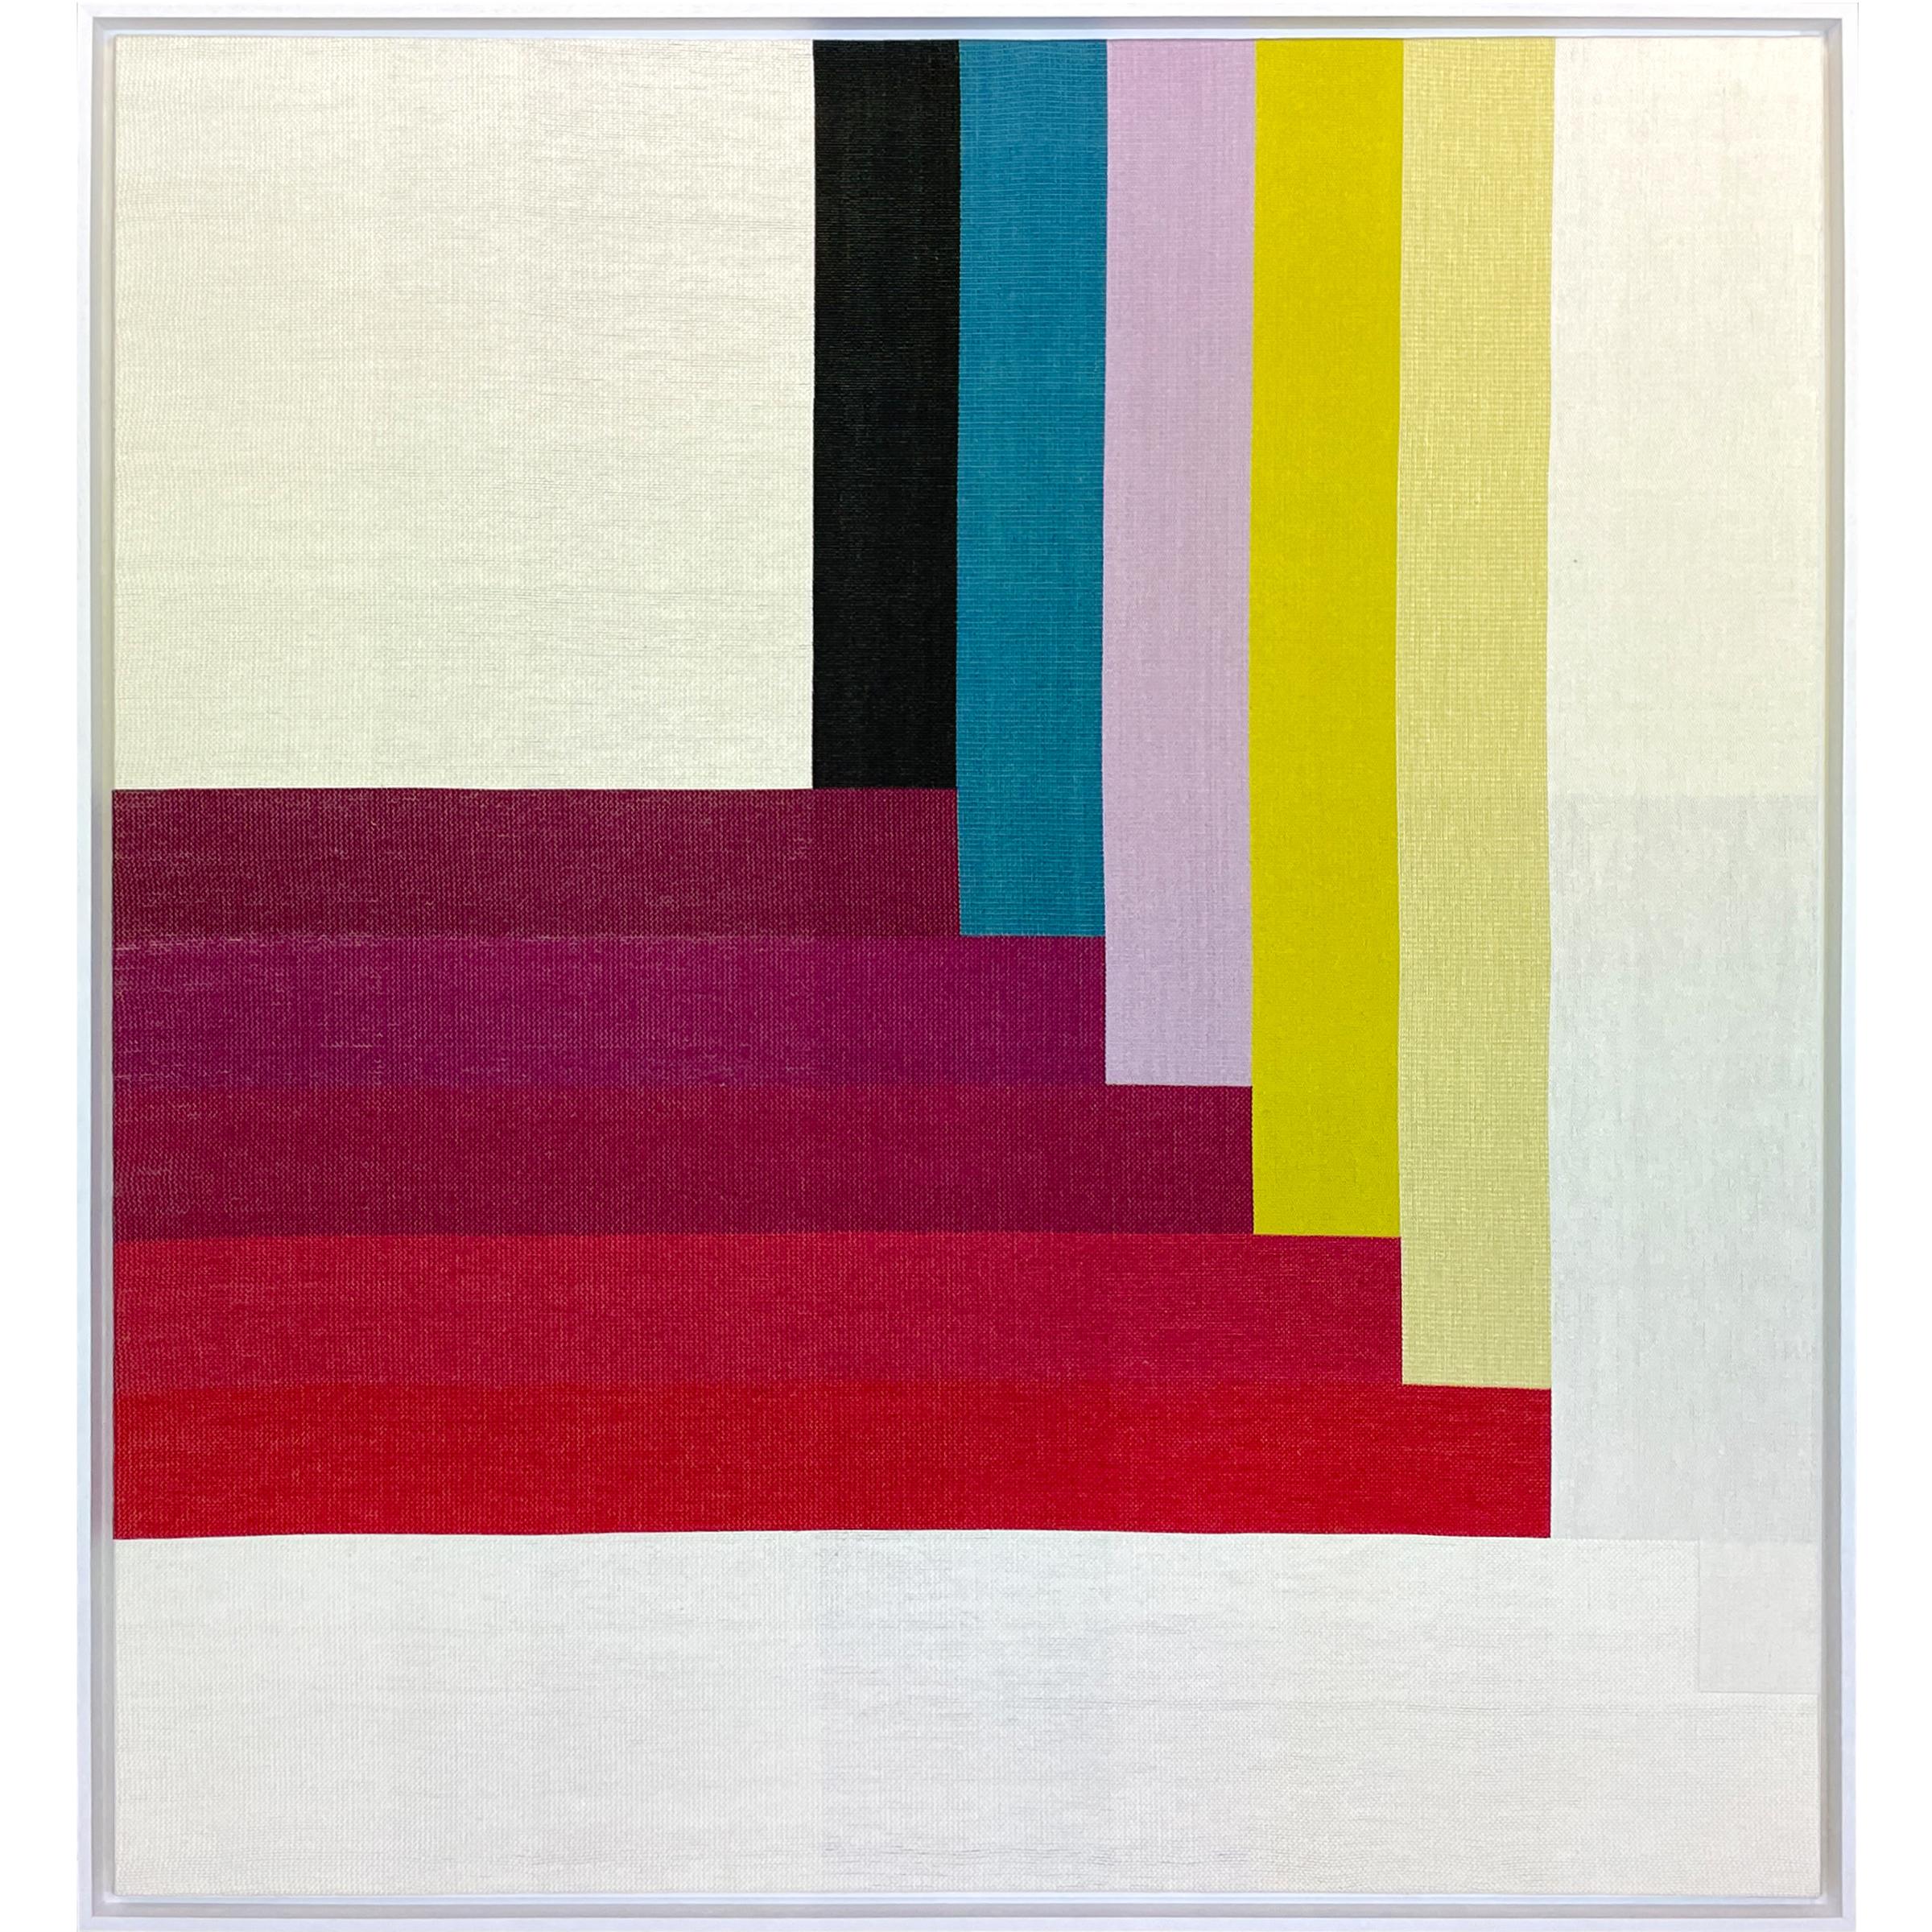 Carré Series, Work Carre II, Margo Selby, Handwoven stretched lampas panel 